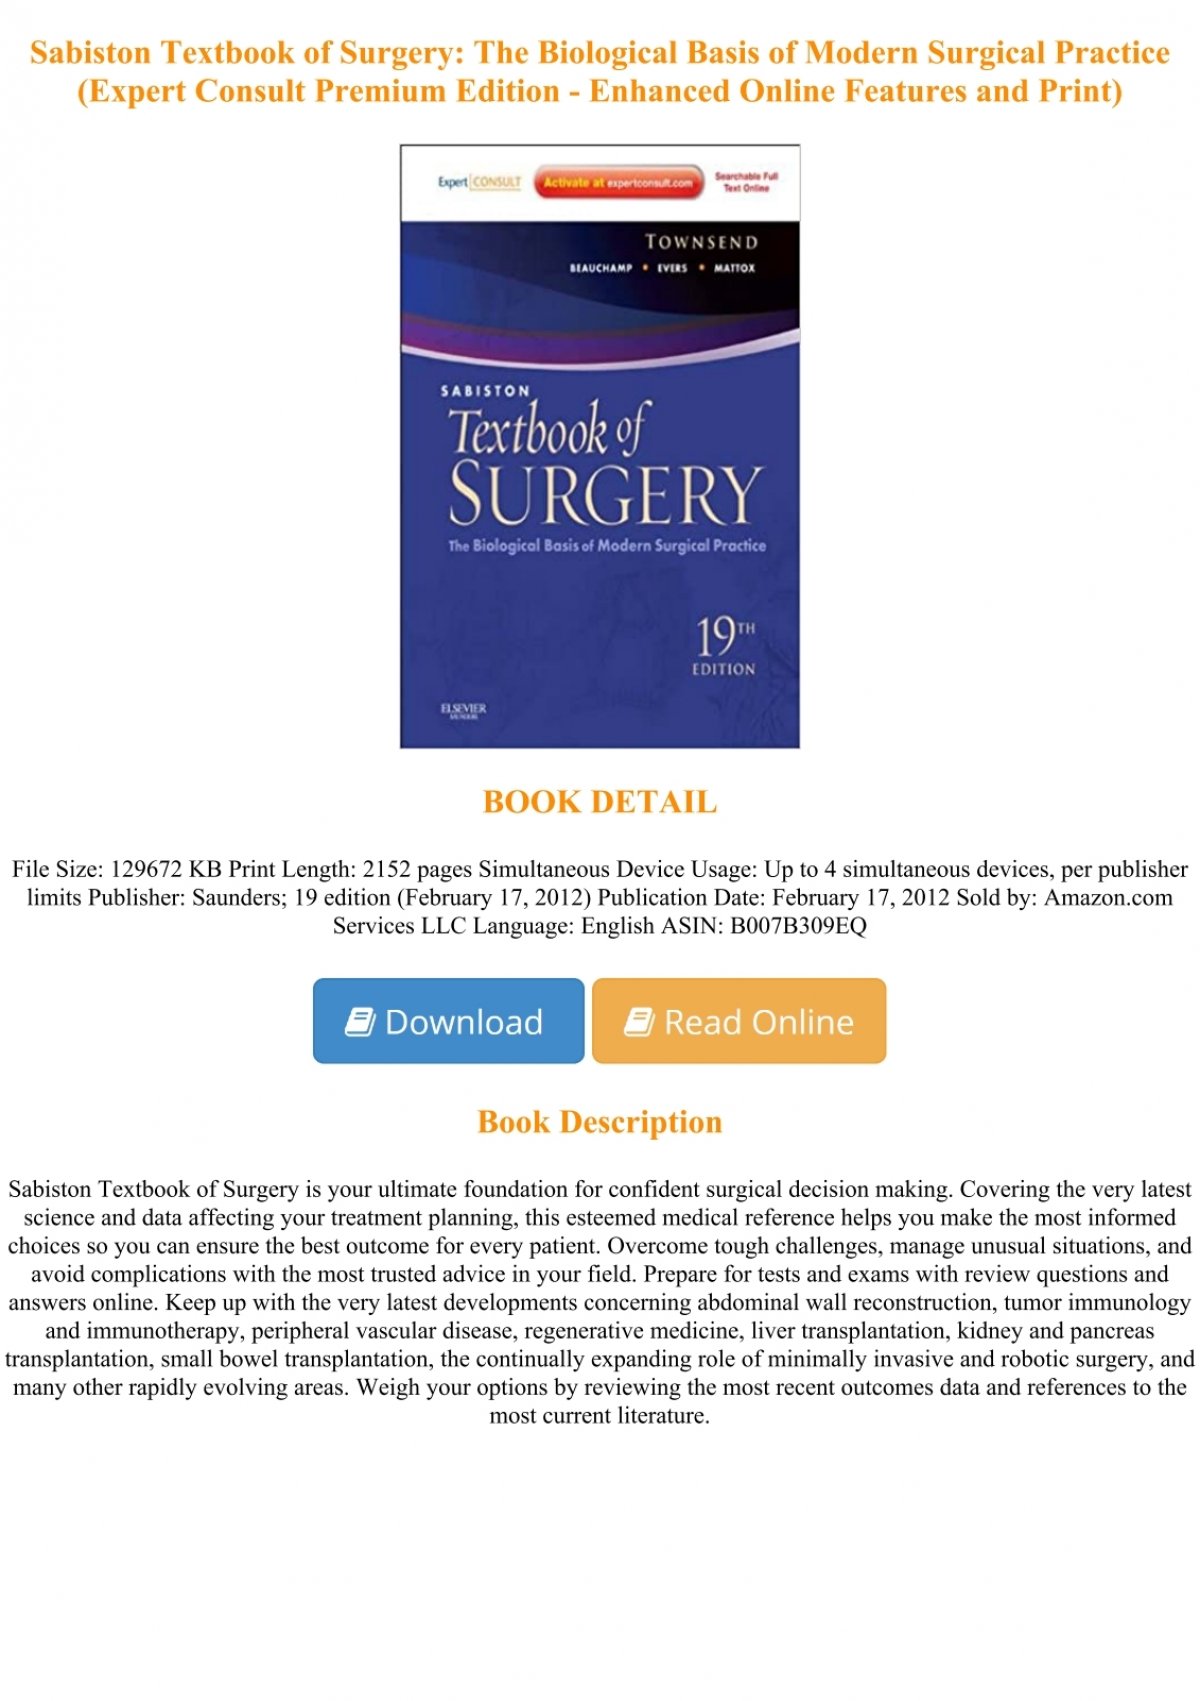 [DOWNLOAD -PDF-] Sabiston Textbook of Surgery: The Biological Basis of